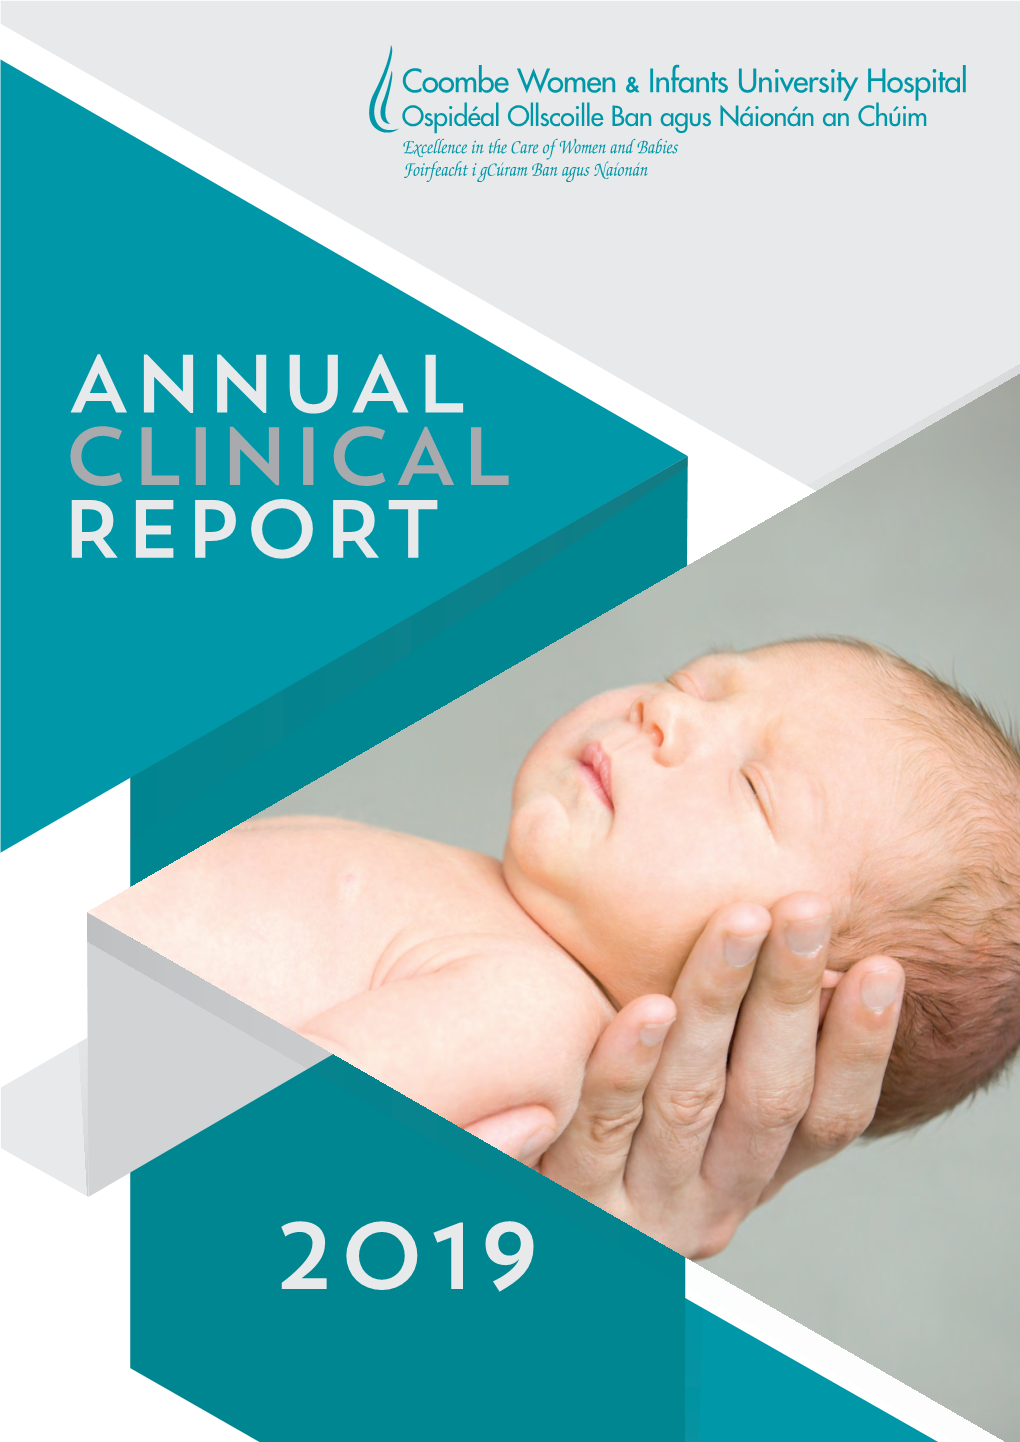 2019 ANNUAL CLINICAL REPORT 2019 Executive Summary 27 28 ANNUAL CLINICAL REPORT 2019 Hospital Overview